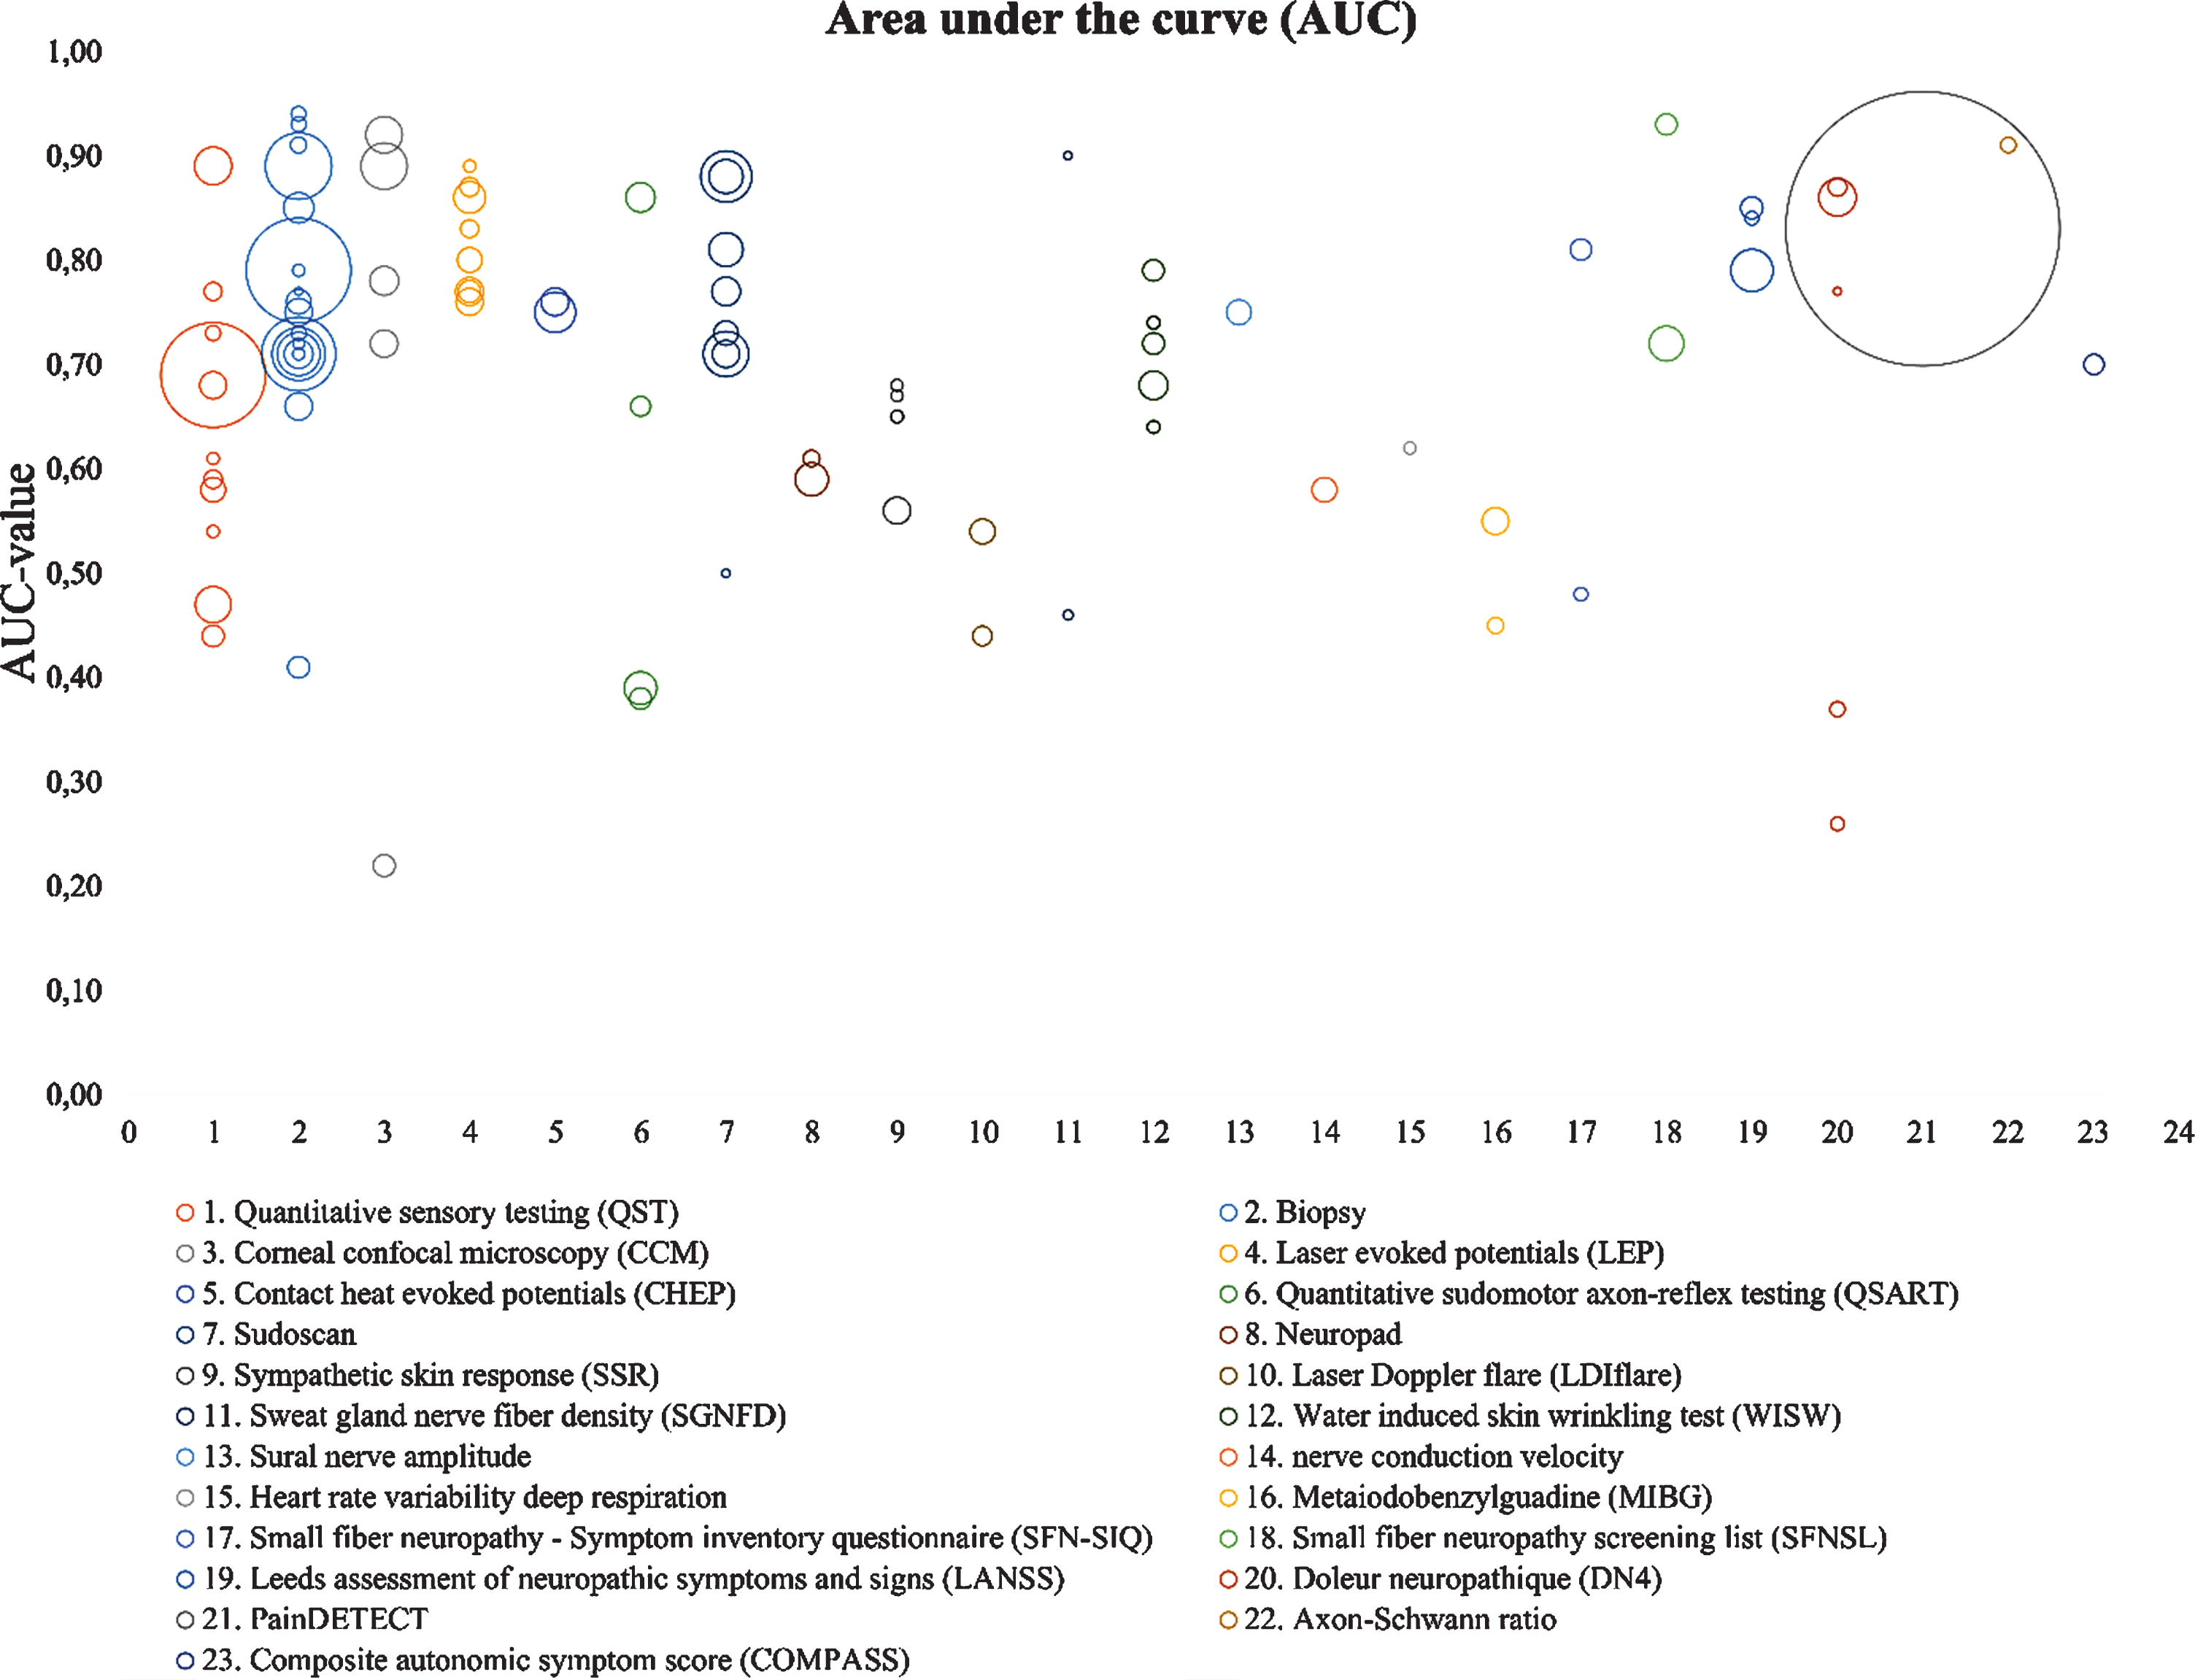 AUC overview of several diagnostic methods. It determines the diagnostic accuracy of each method. The size of each bubble, represents the study size. Unmyelinated axon-Schwann ration is calculated based on biopsies and not further reviewed in this article.